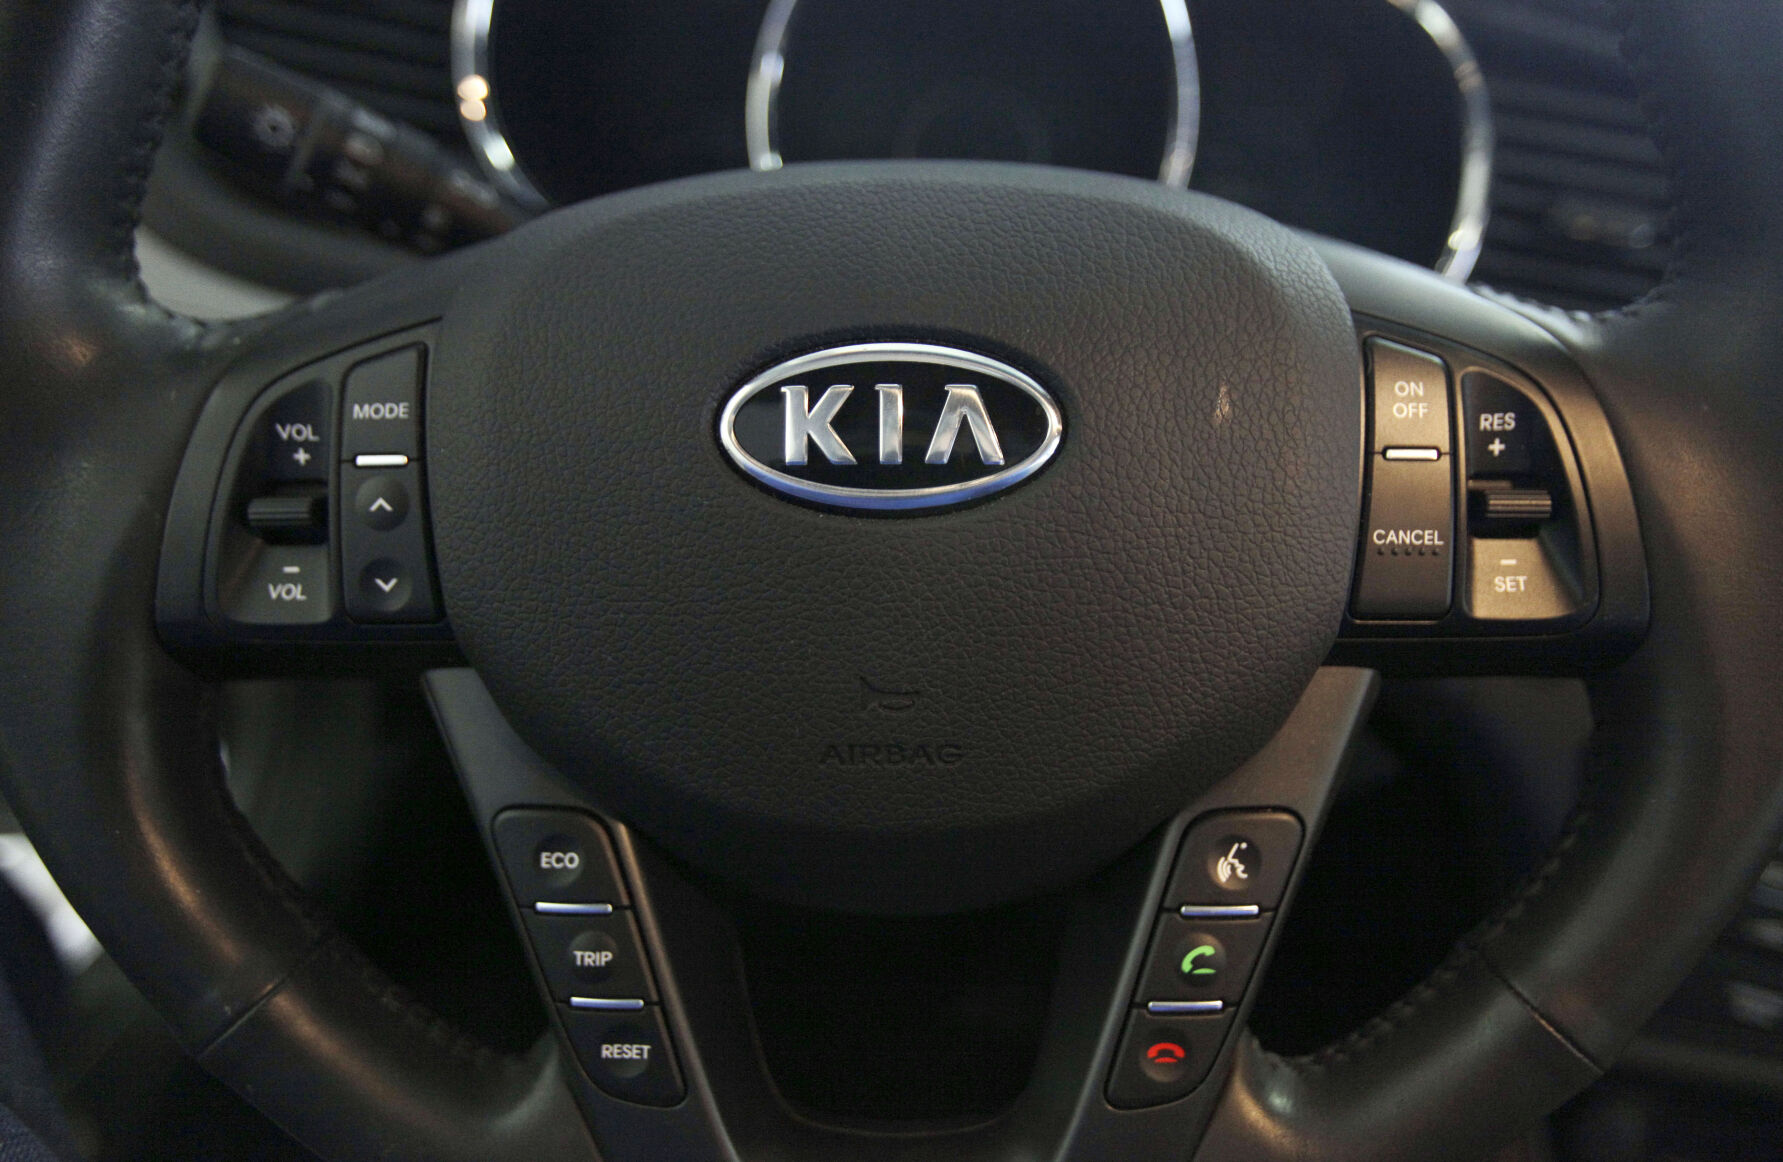 <p>FILE - The Kia logo brands a steering wheel inside of a Kia car dealership in Elmhurst, Ill., Oct. 5, 2012. A federal judge on Wednesday, Aug. 16, 2023, declined to approve a tentative settlement in a class-action lawsuit prompted by a surge in Hyundai and Kia vehicle thefts, saying it fails to provide “fair and adequate” relief to vehicle owners. (AP Photo/Nam Y. Huh, File)</p>   PHOTO CREDIT: Nam Y. Huh 